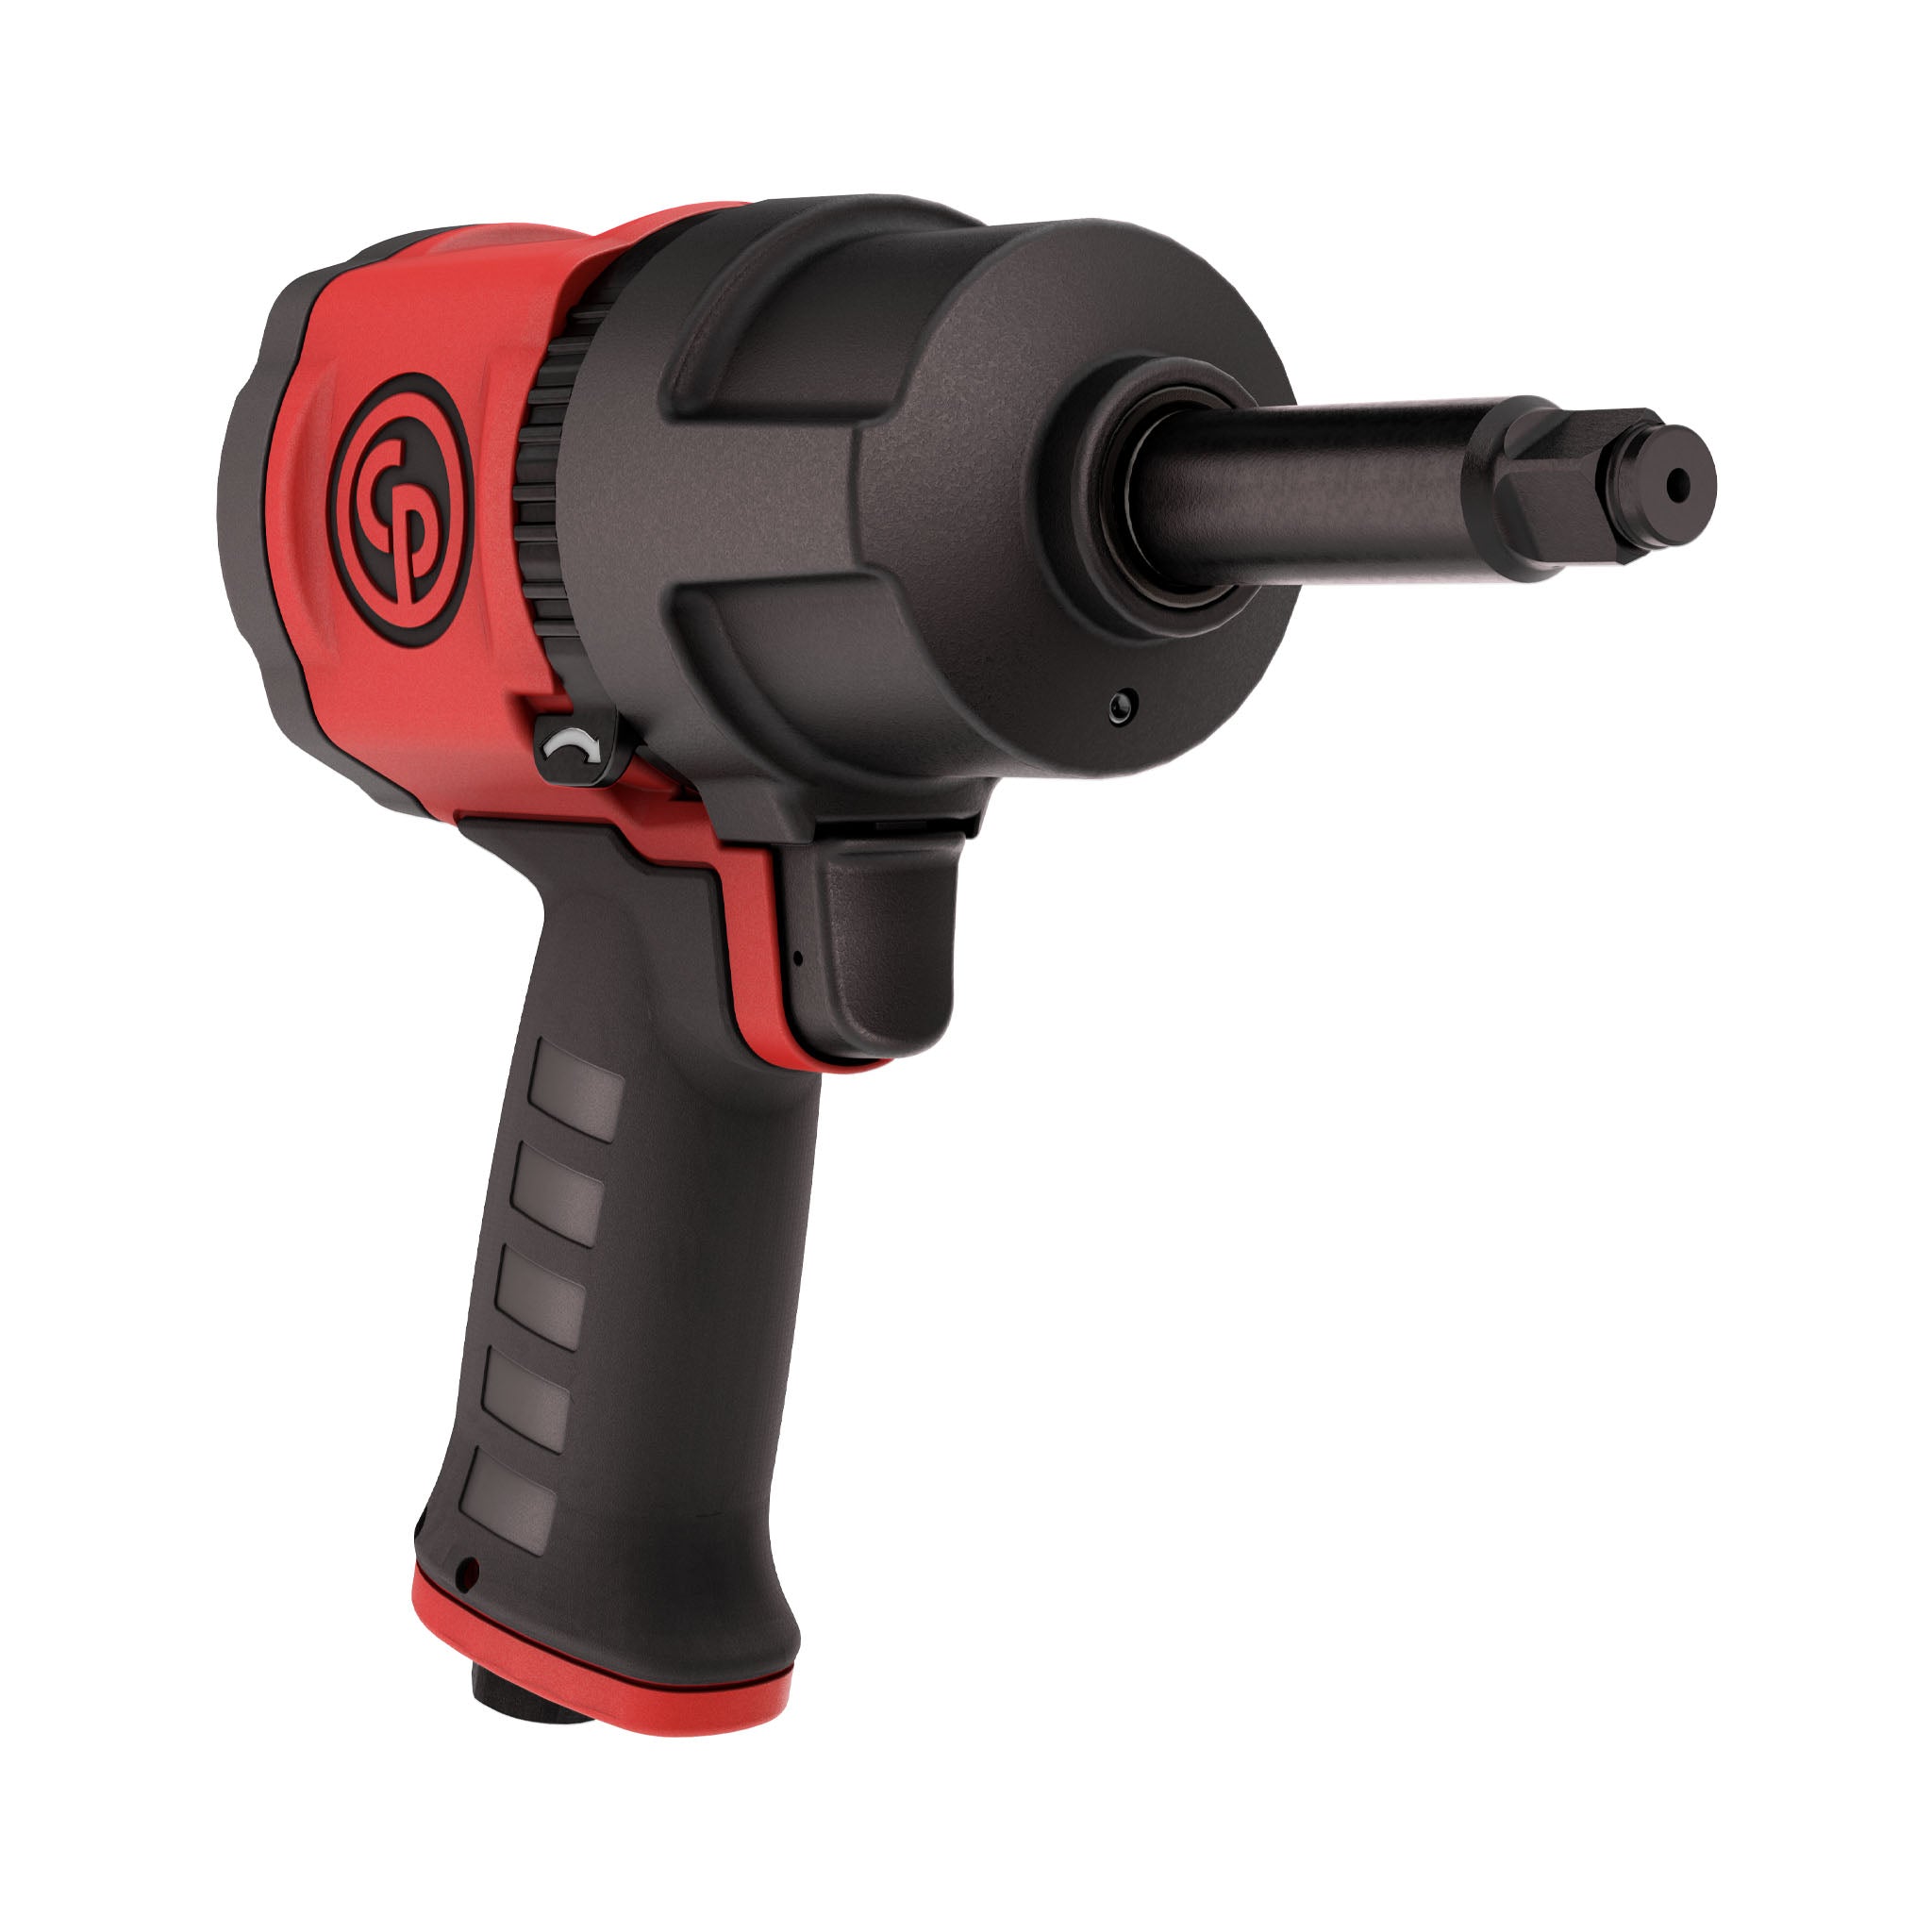 Chicago Pneumatic 1/2" Impact Wrench - CP-7748-2